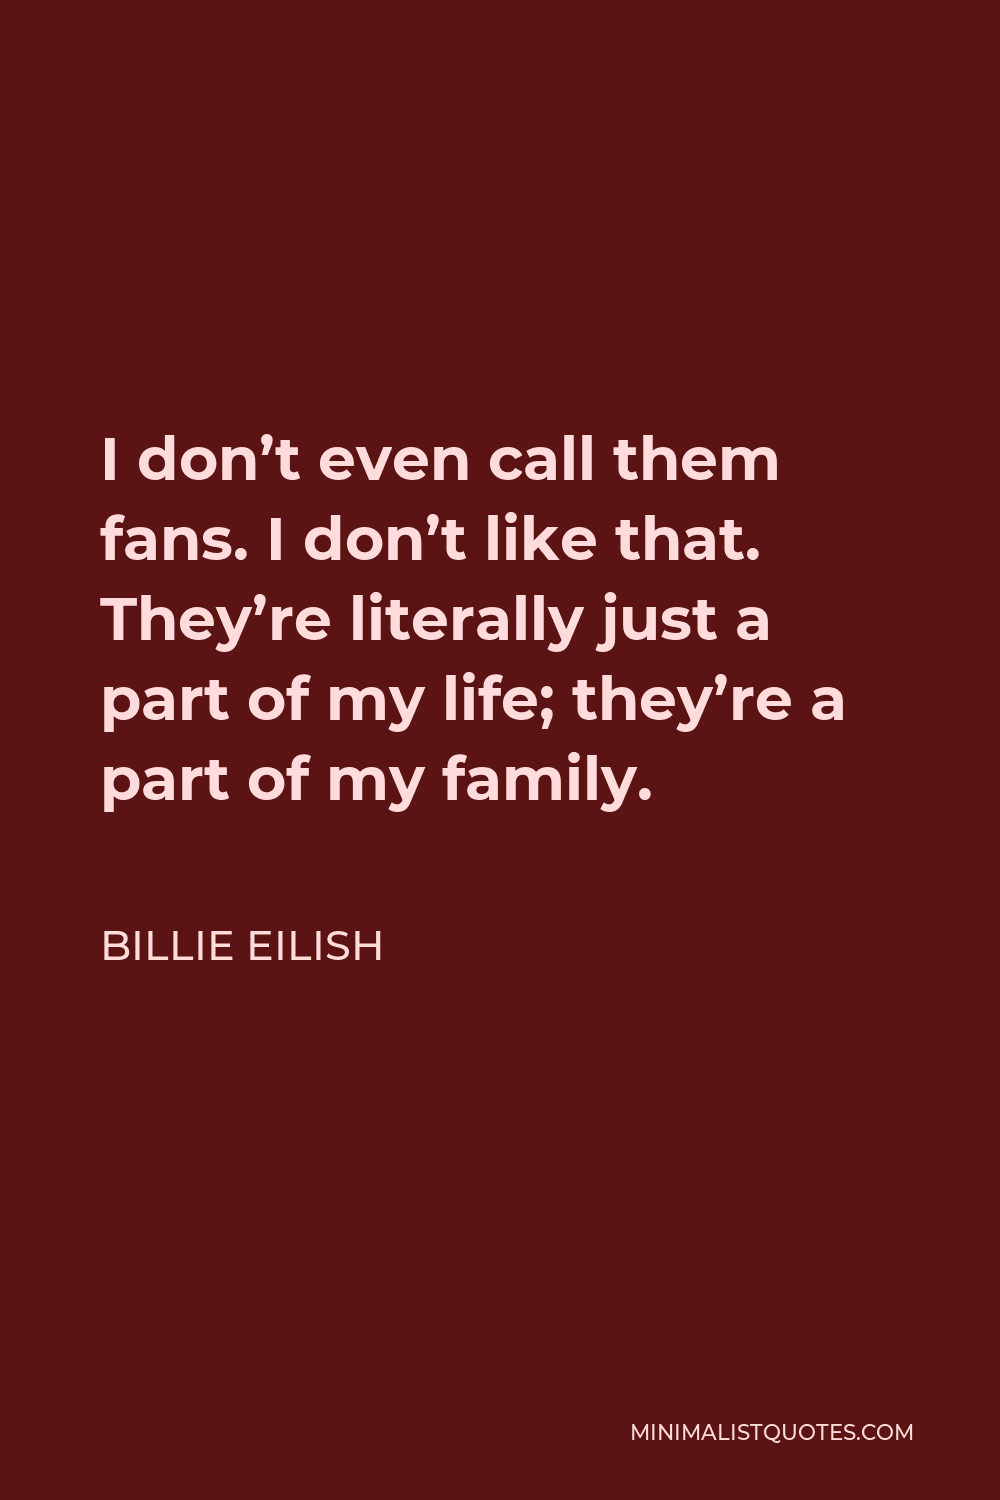 Billie Eilish Quote - I don’t even call them fans. I don’t like that. They’re literally just a part of my life; they’re a part of my family.